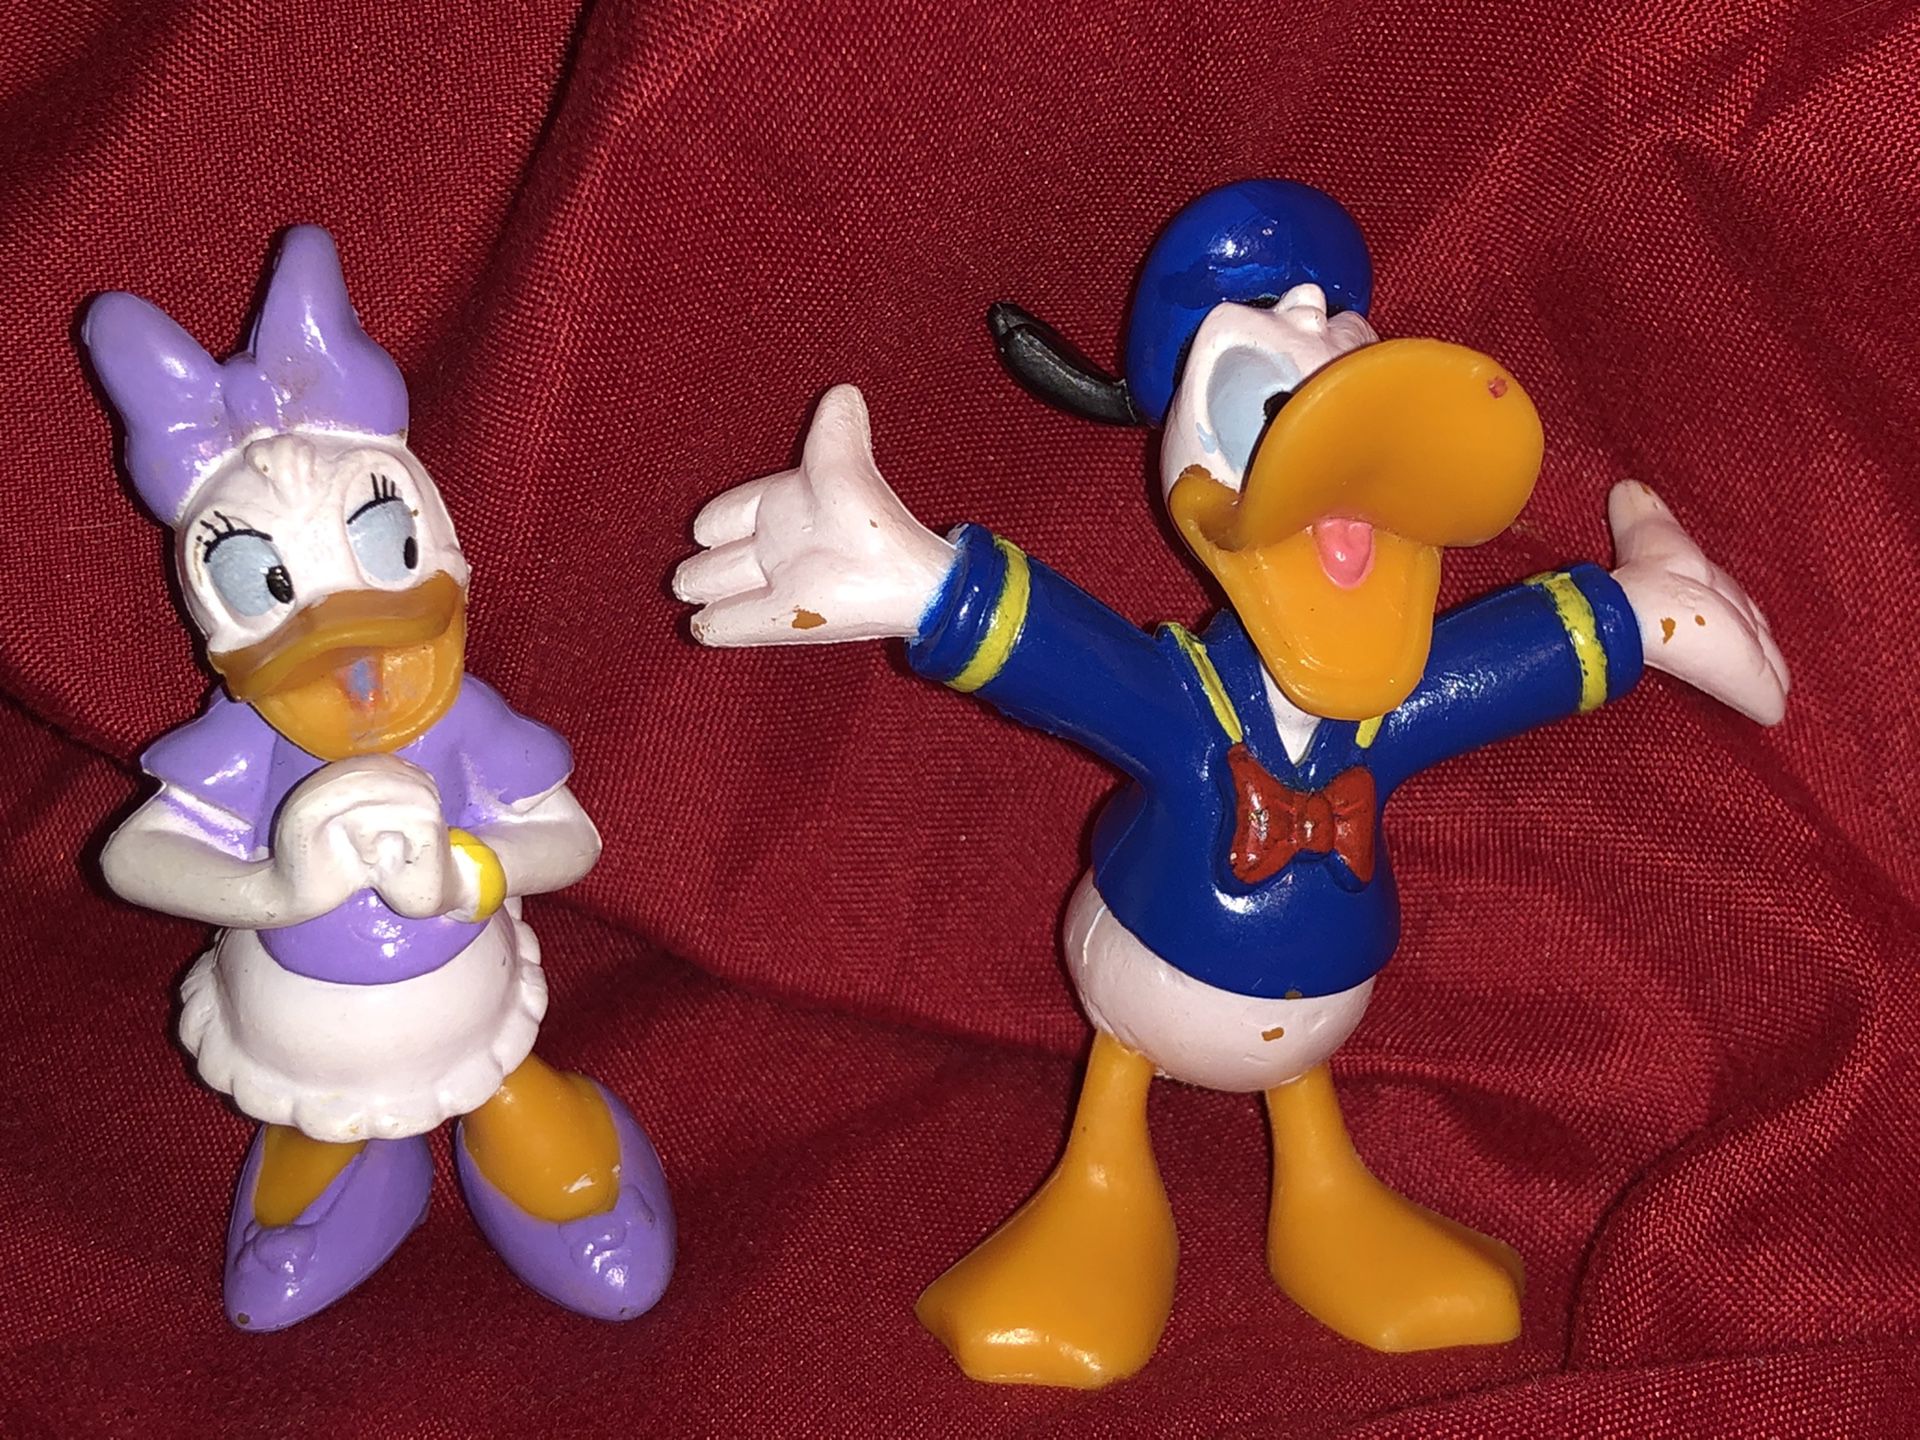 Disney Donald Duck and Daisy Duck figurine lot set ! Toy sale! Cake toppers, vintage , Disney sale! Free gift with purchase